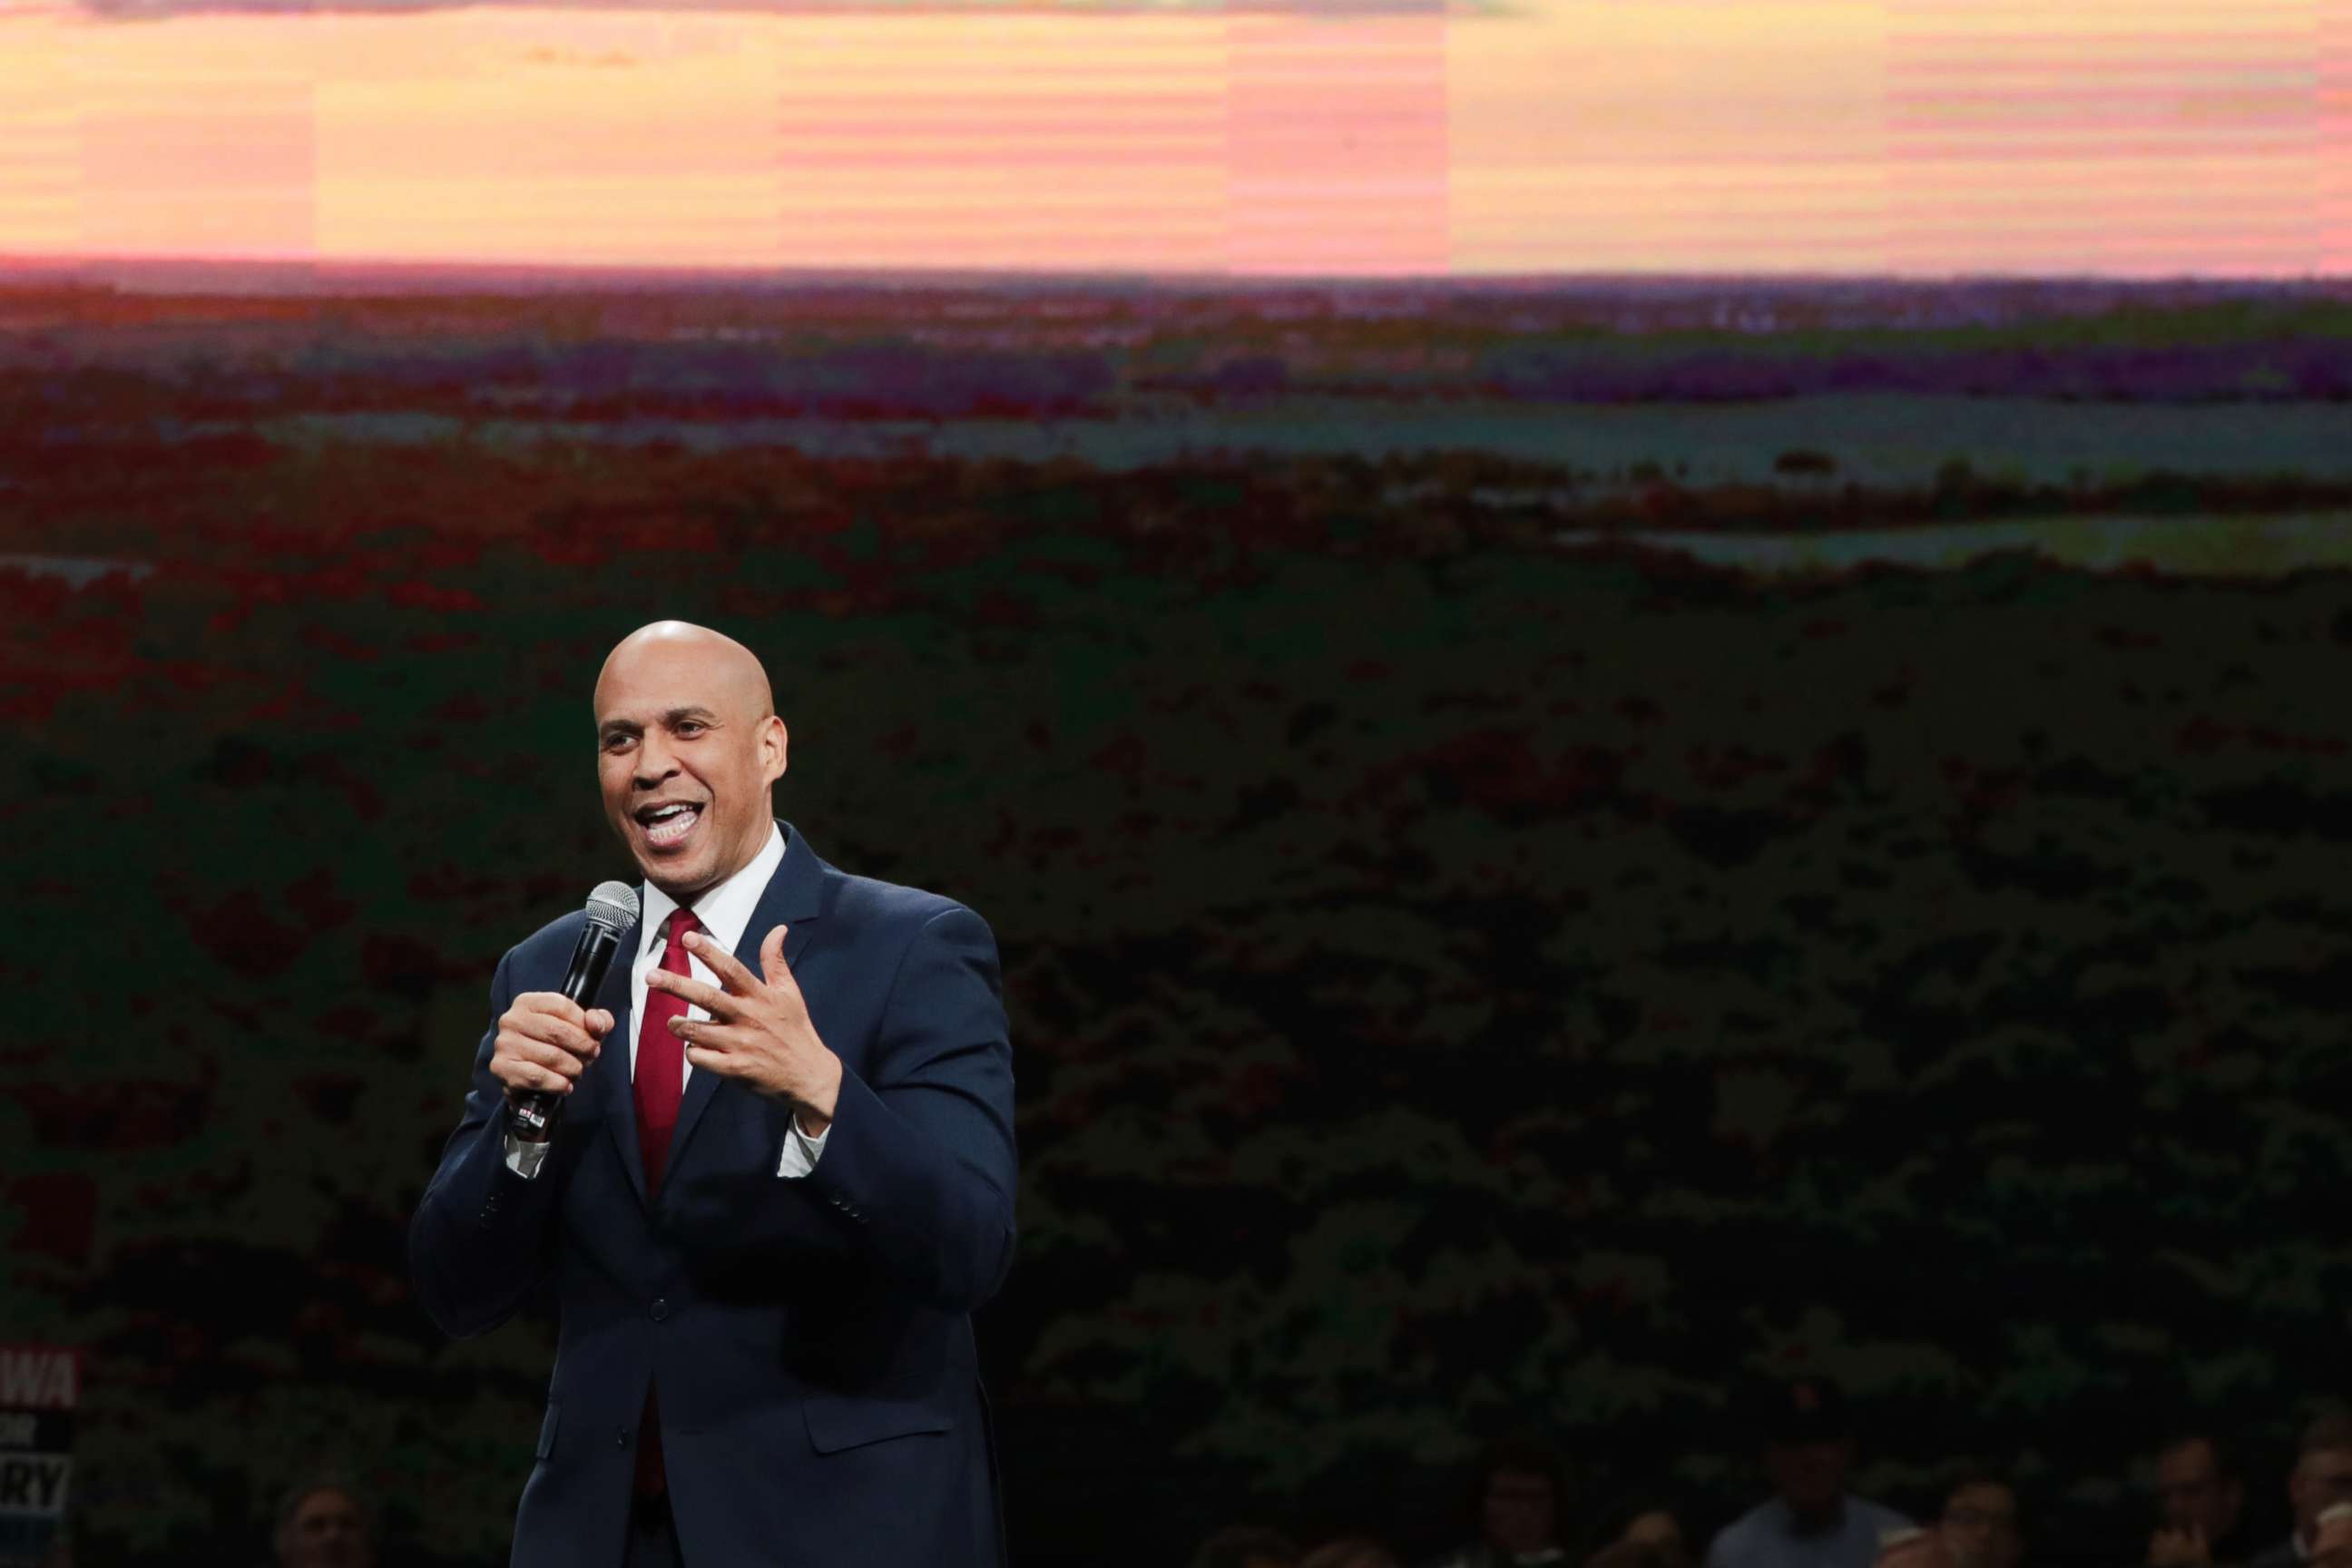 PHOTO: Democratic presidential candidate Sen. Cory Booker speaks at the Liberty and Justice Celebration at the Wells Fargo Arena on Nov. 01, 2019, in Des Moines, Iowa.